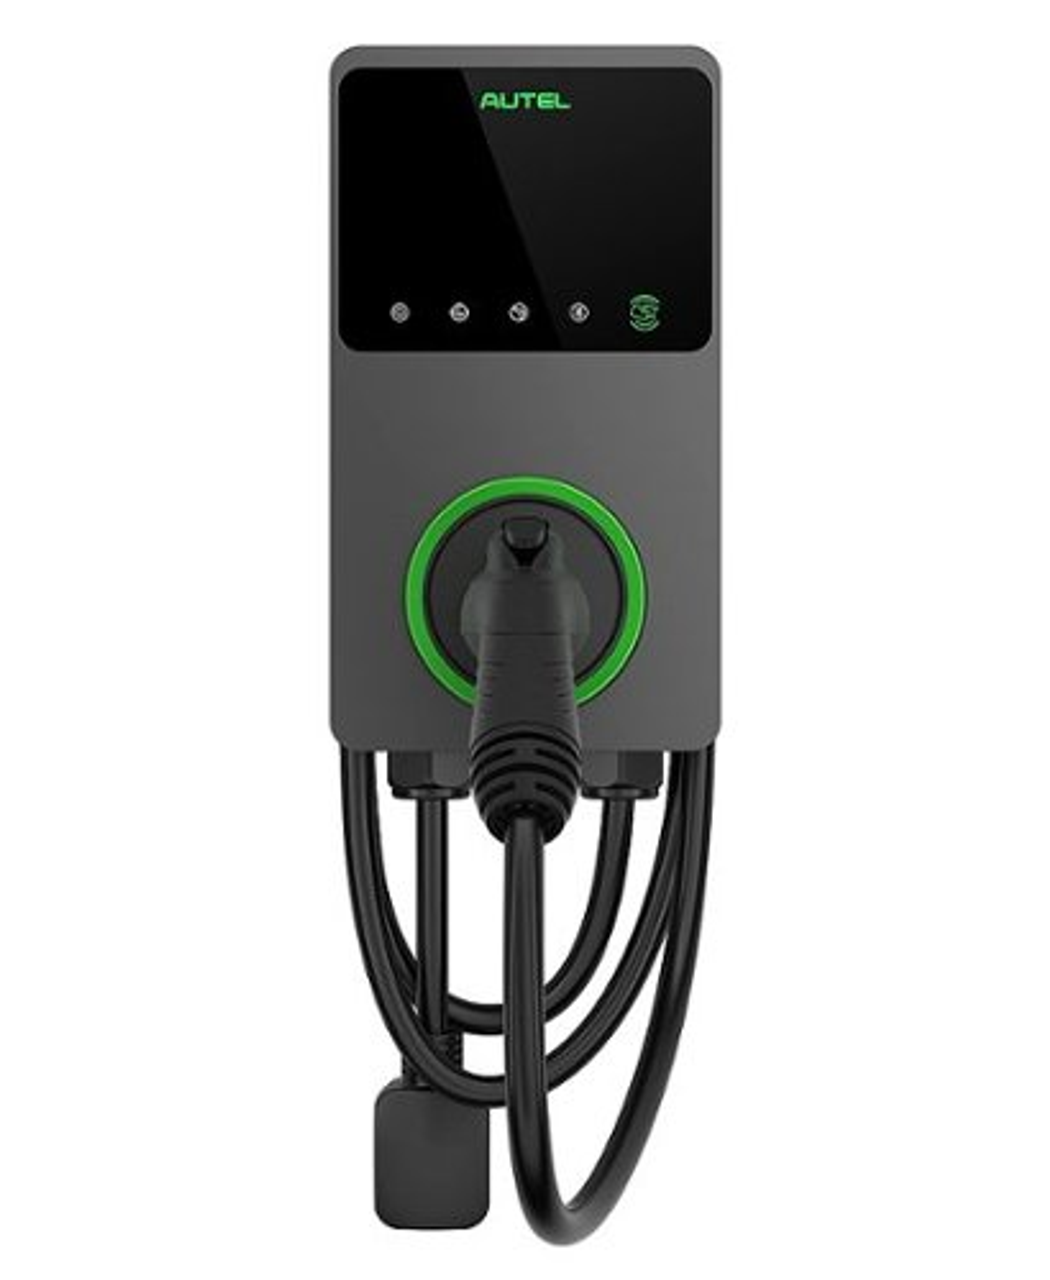 Autel - Residential EV Charger 40A In-Body Holster 6-50 - Dark Gray